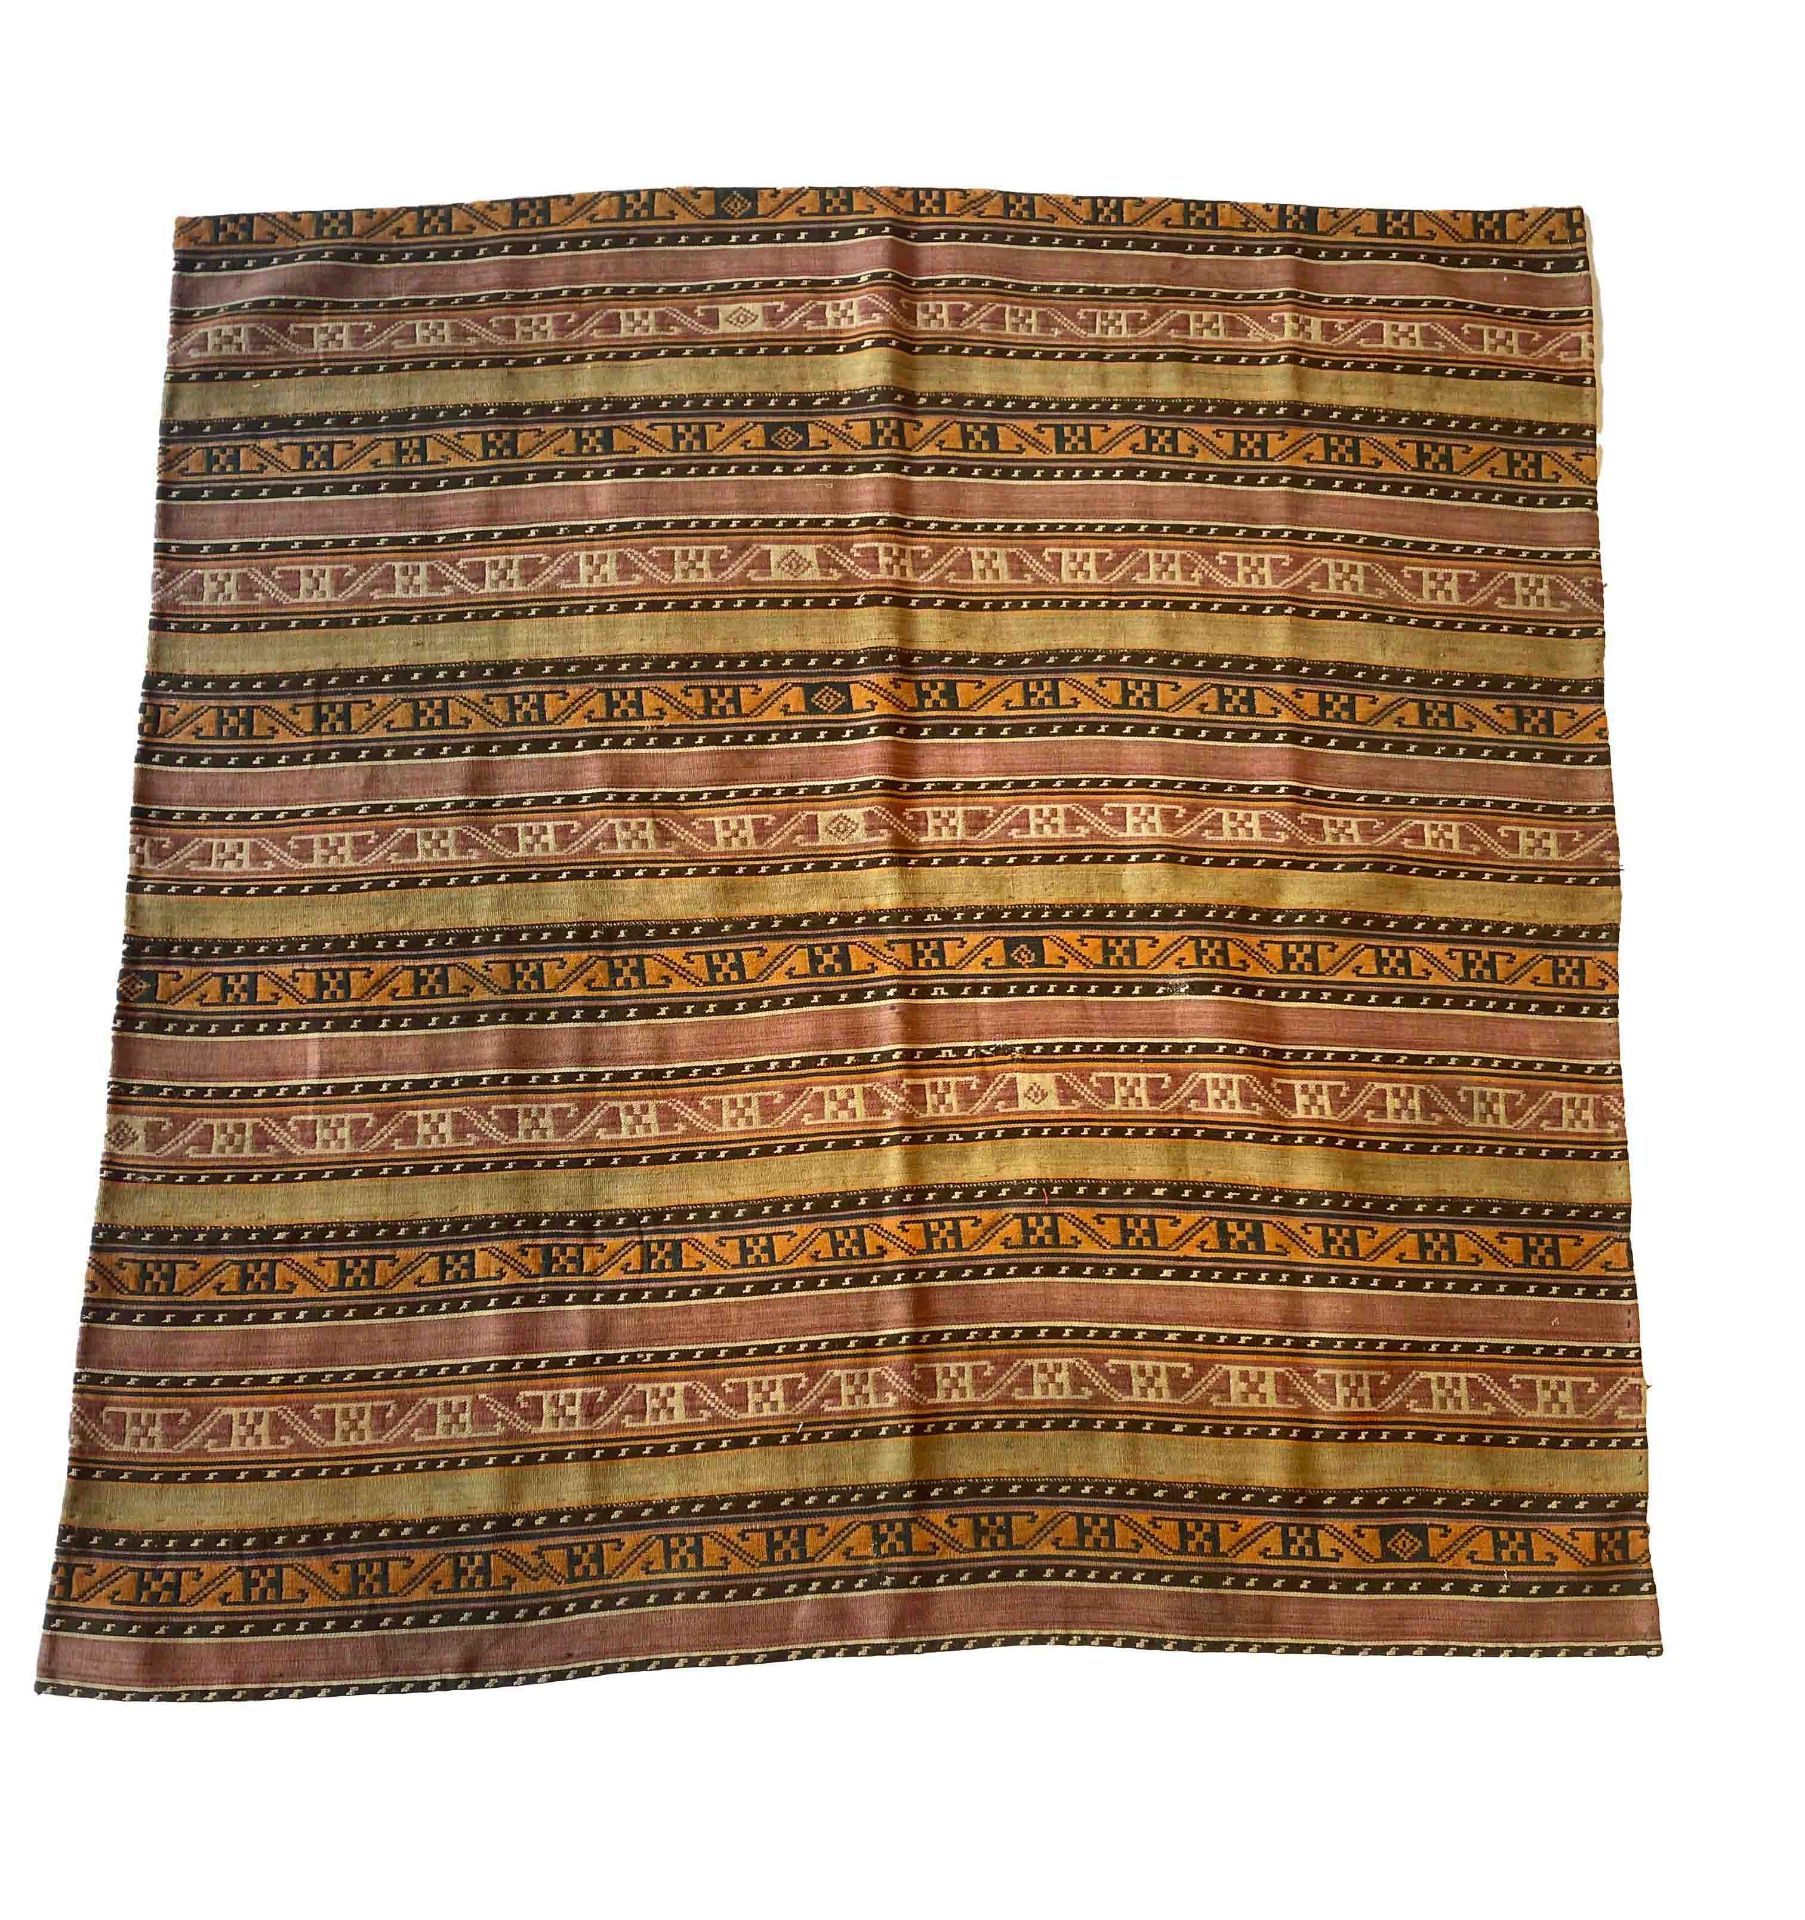 Flatweave, kilim, Turkey or Caucasus, minor wear, 143 x 140 cm - The rug can only be viewed and